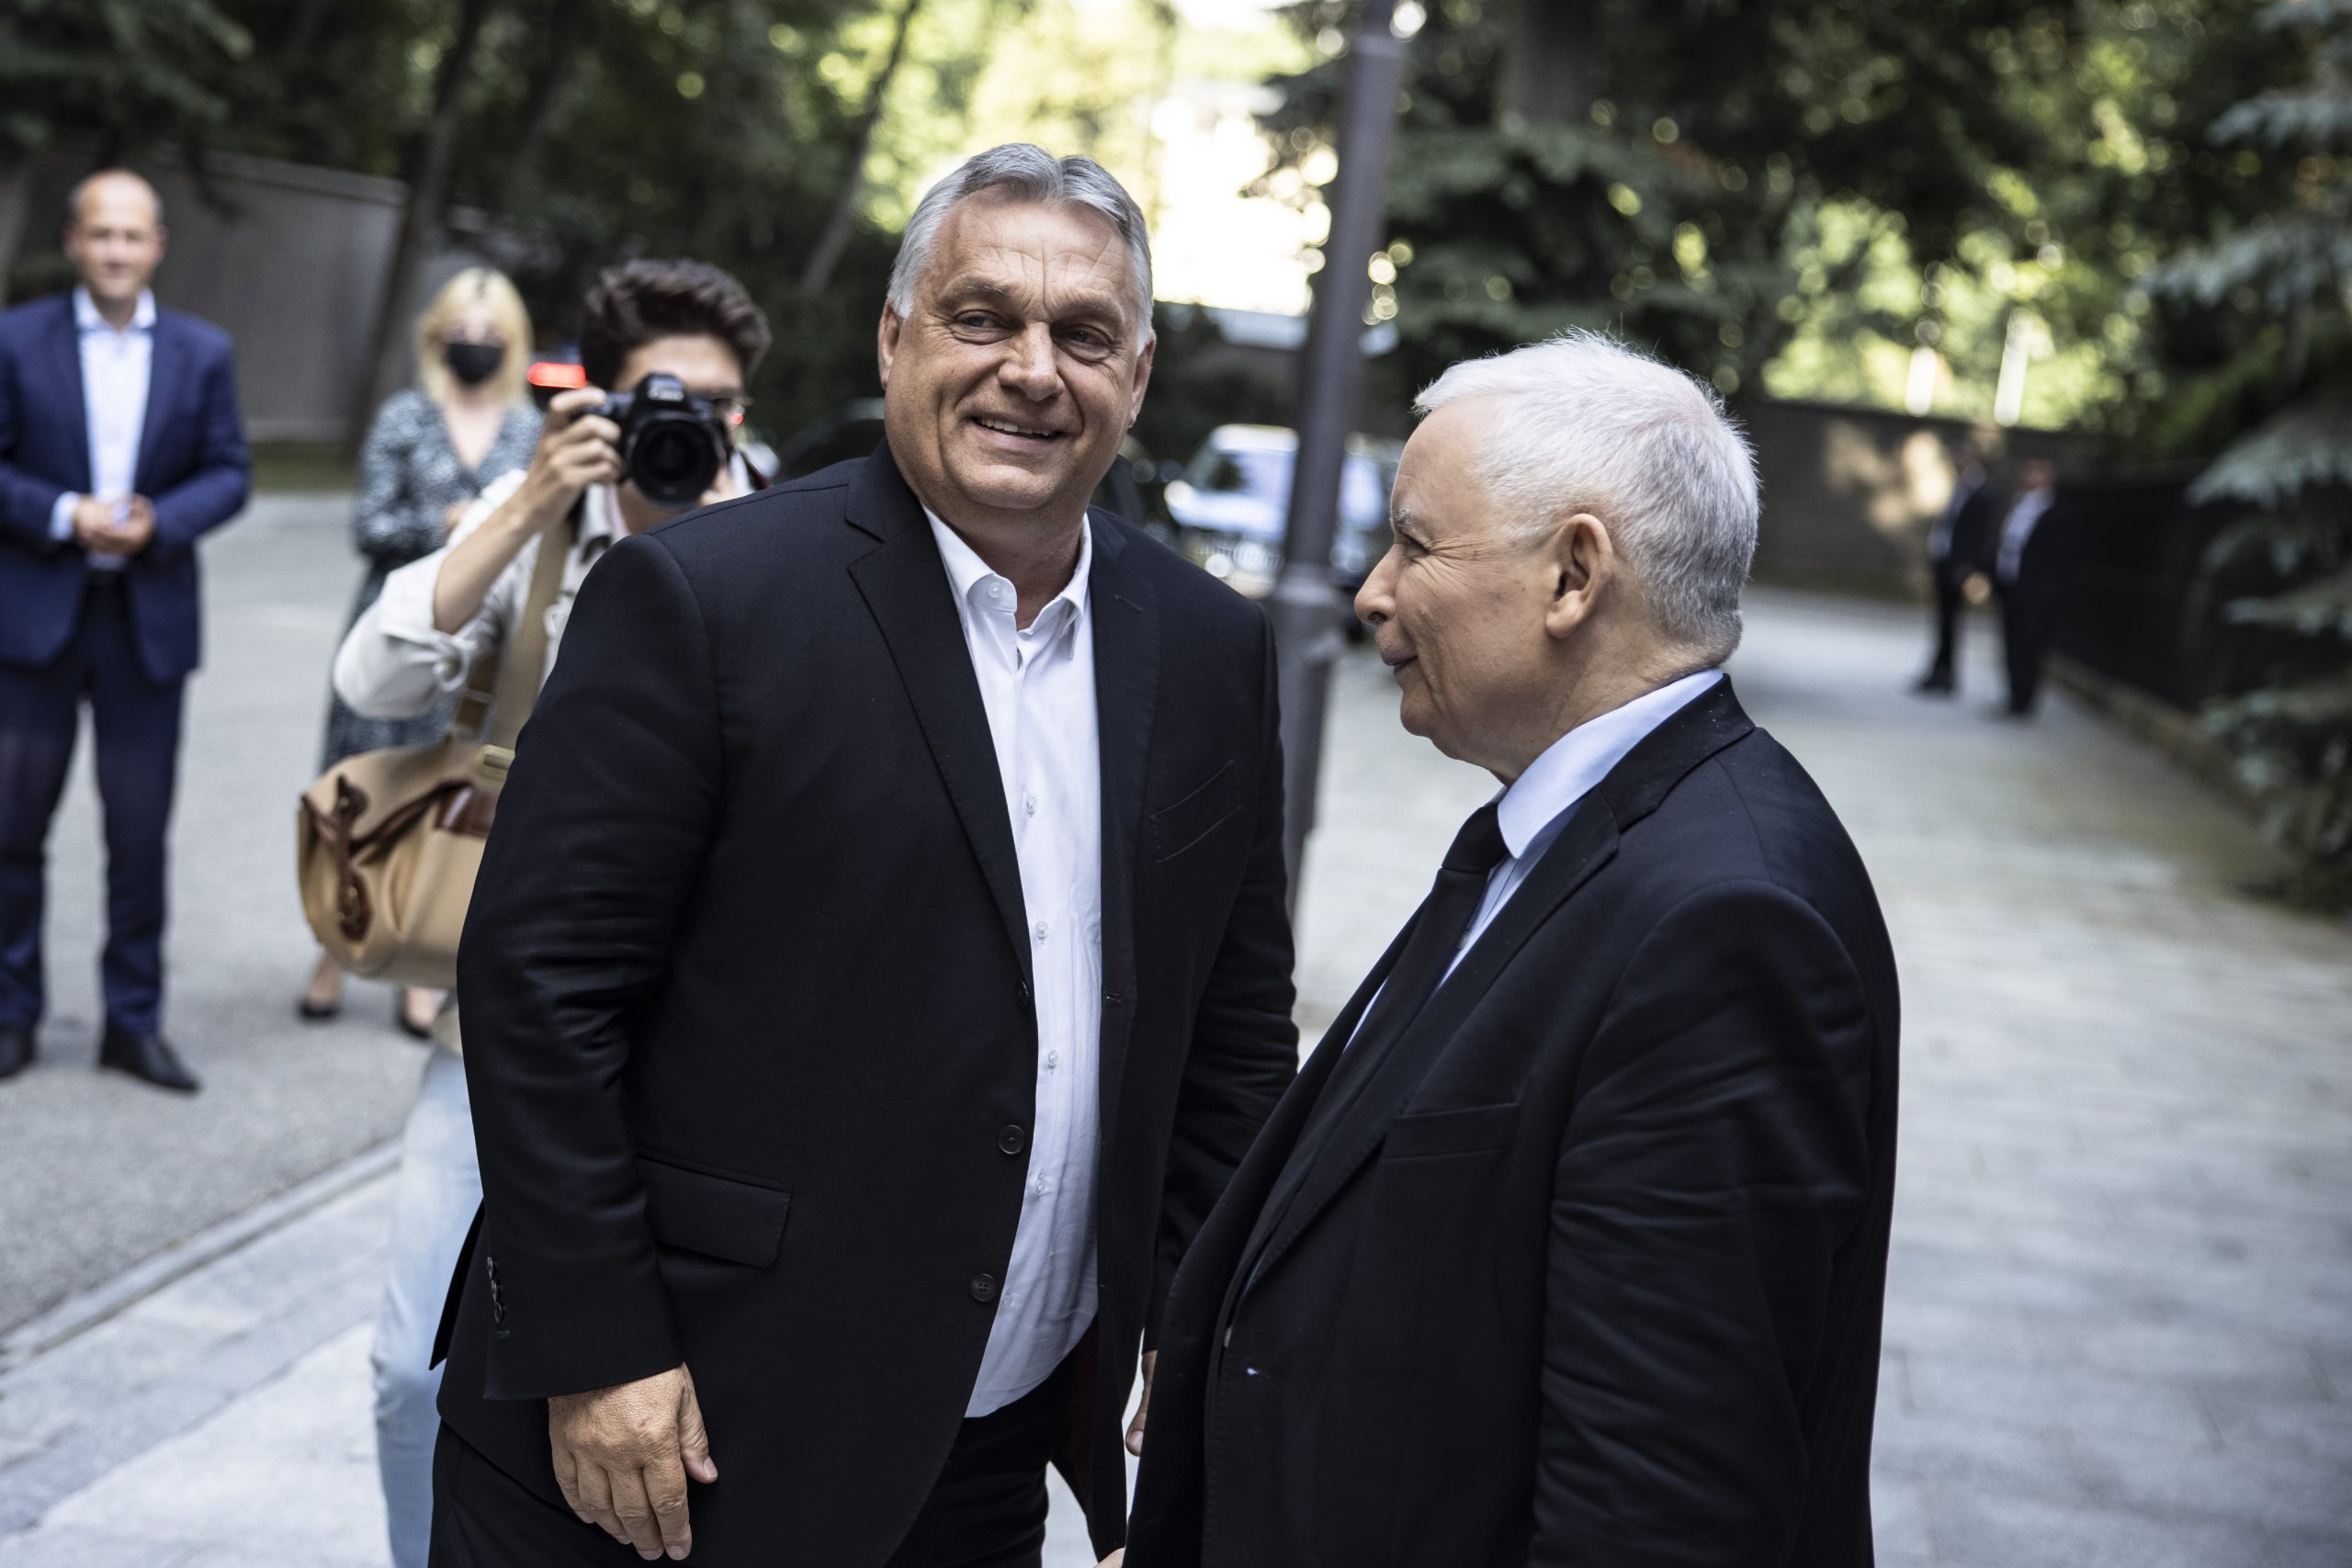 PM Orbán Holds Talks with PiS Leader Kaczynski in Warsaw